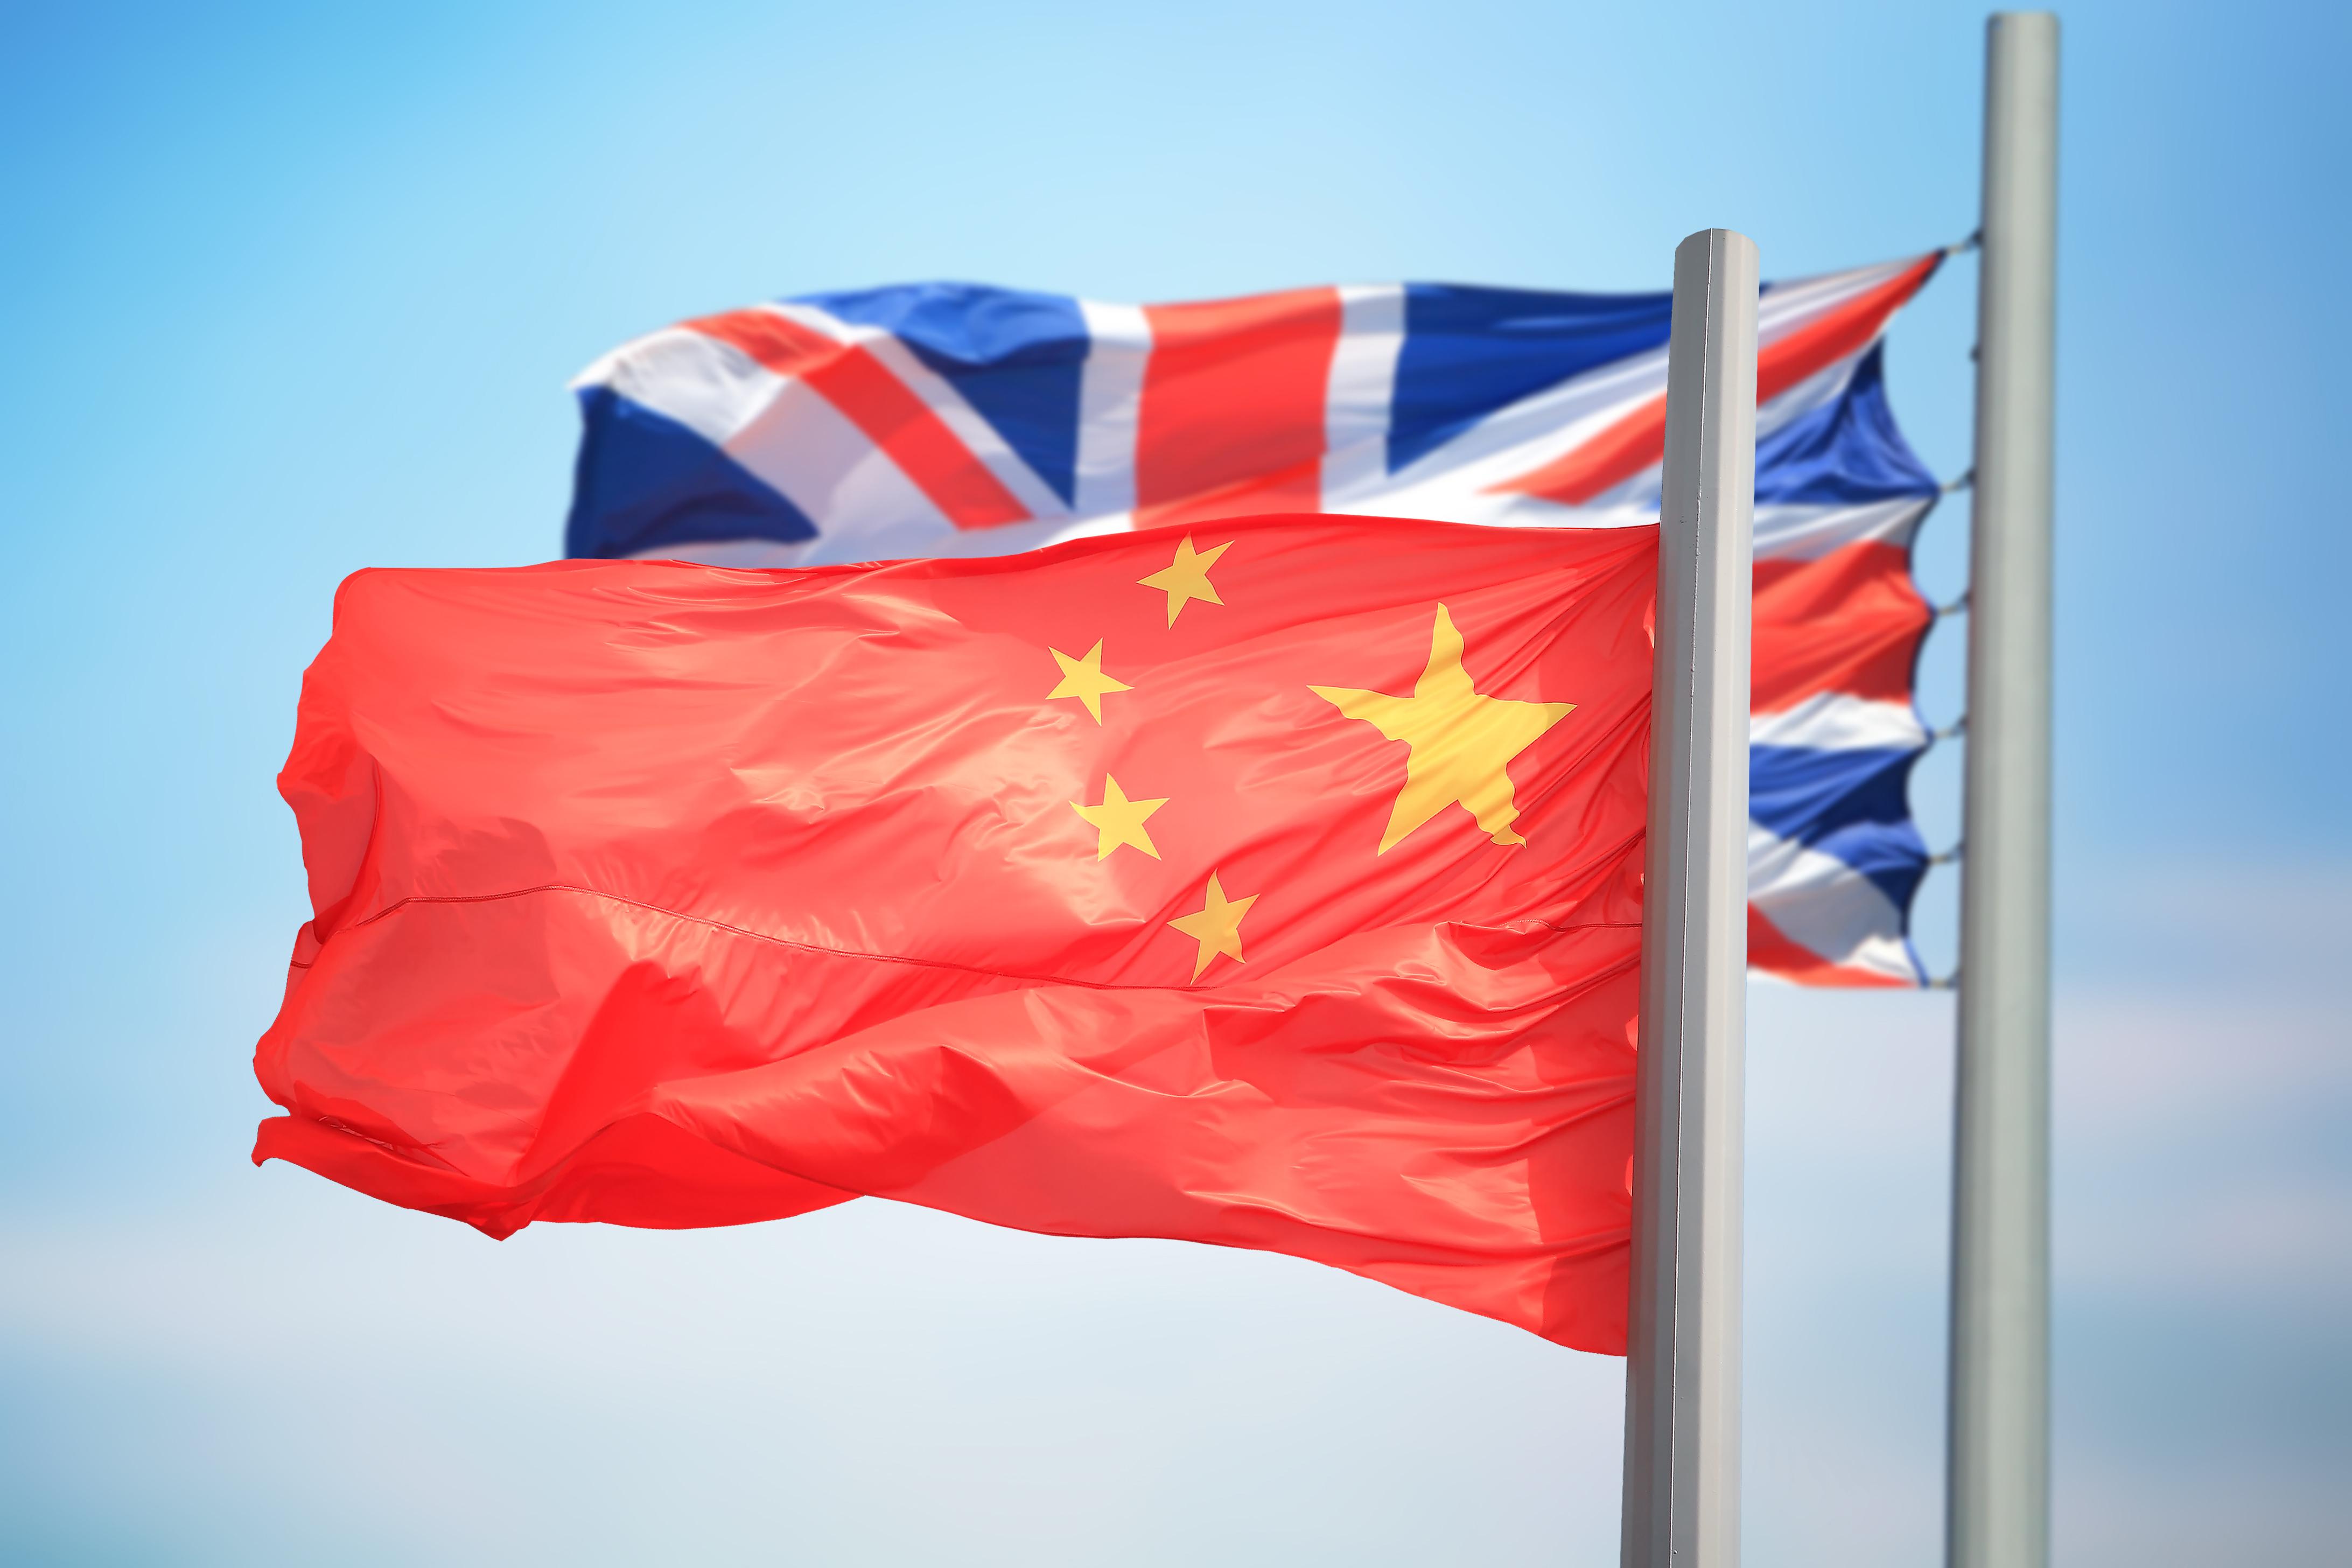 Flags of China and Great Britain against the background of the blue sky